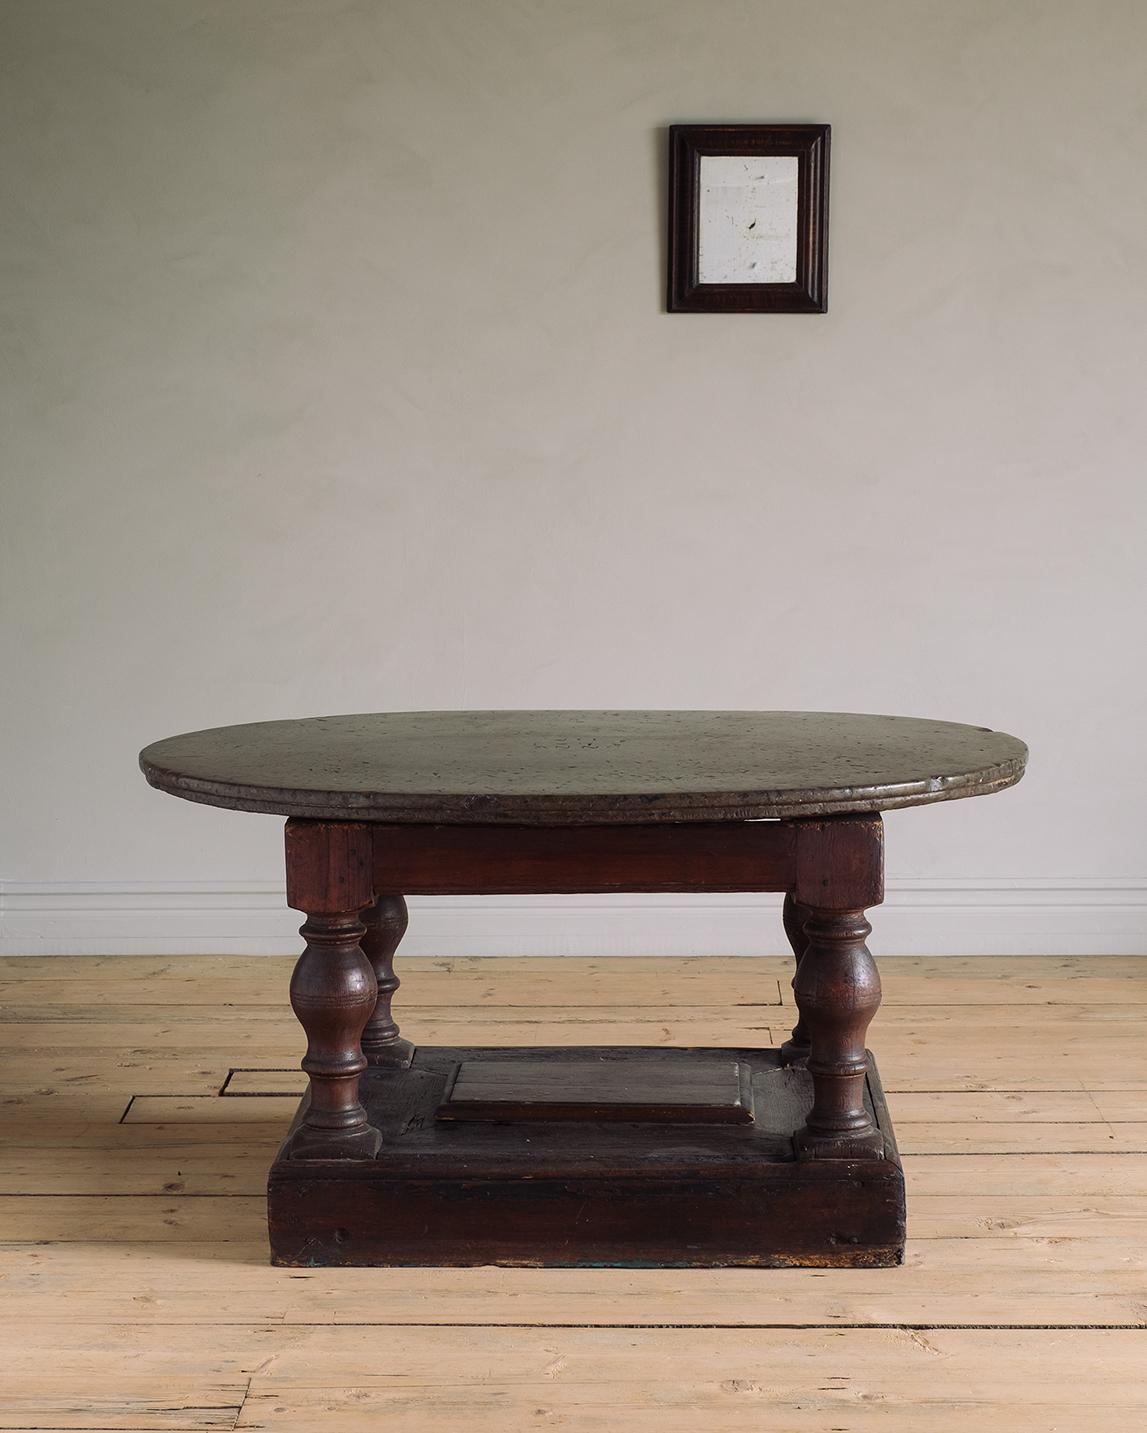 Early 18th century Swedish baroque centre table with an oval limestone top dated 1718 from the island of Öland. 

Good condition with wear consistent with age and use. Original finish with light scratches on the limestone top. A detailed condition